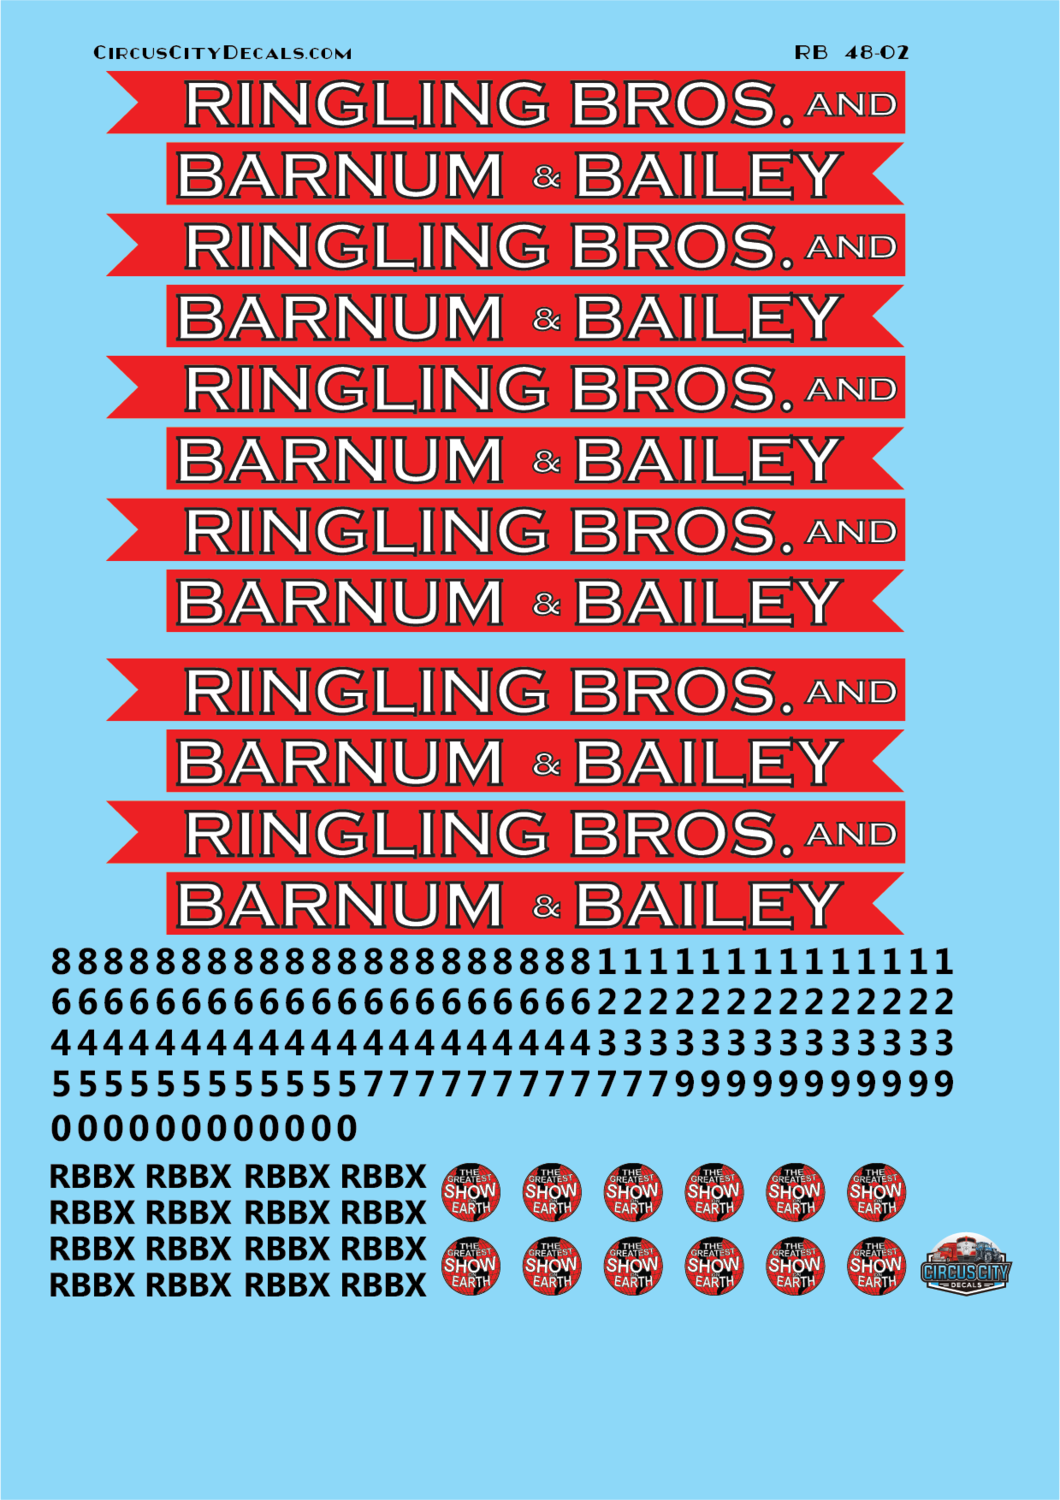 Ringling Brothers & Barnum Bailey Red Unit RBBB Modern Circus Train Decals O Scale